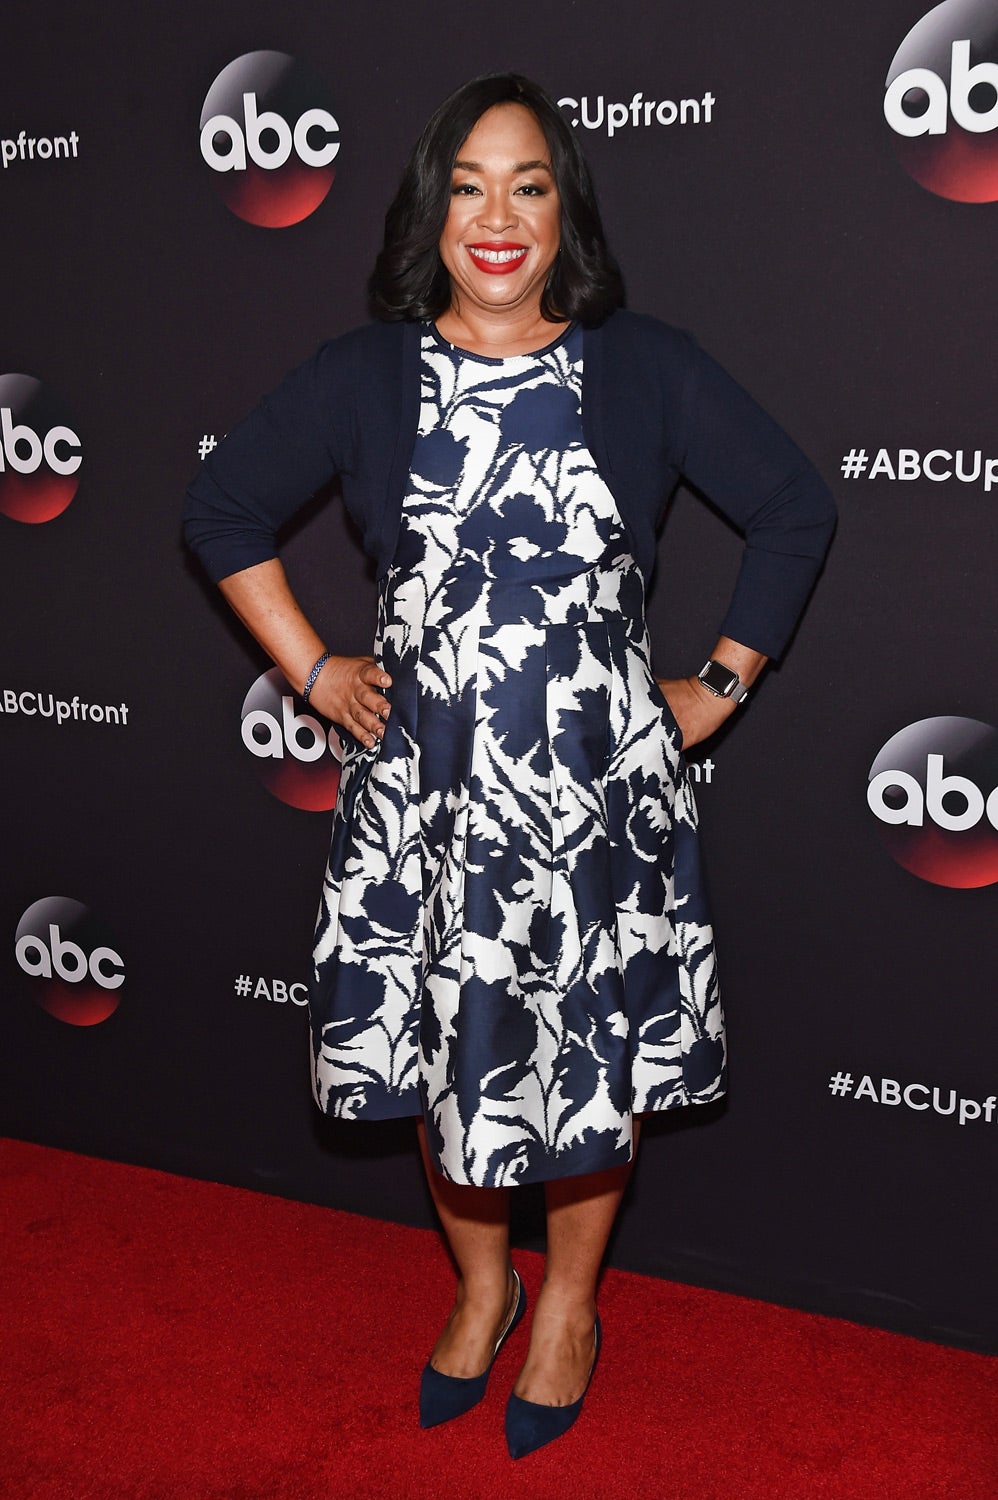 10 Bold Shonda Rhimes Quotes to Inspire the Boss In You
